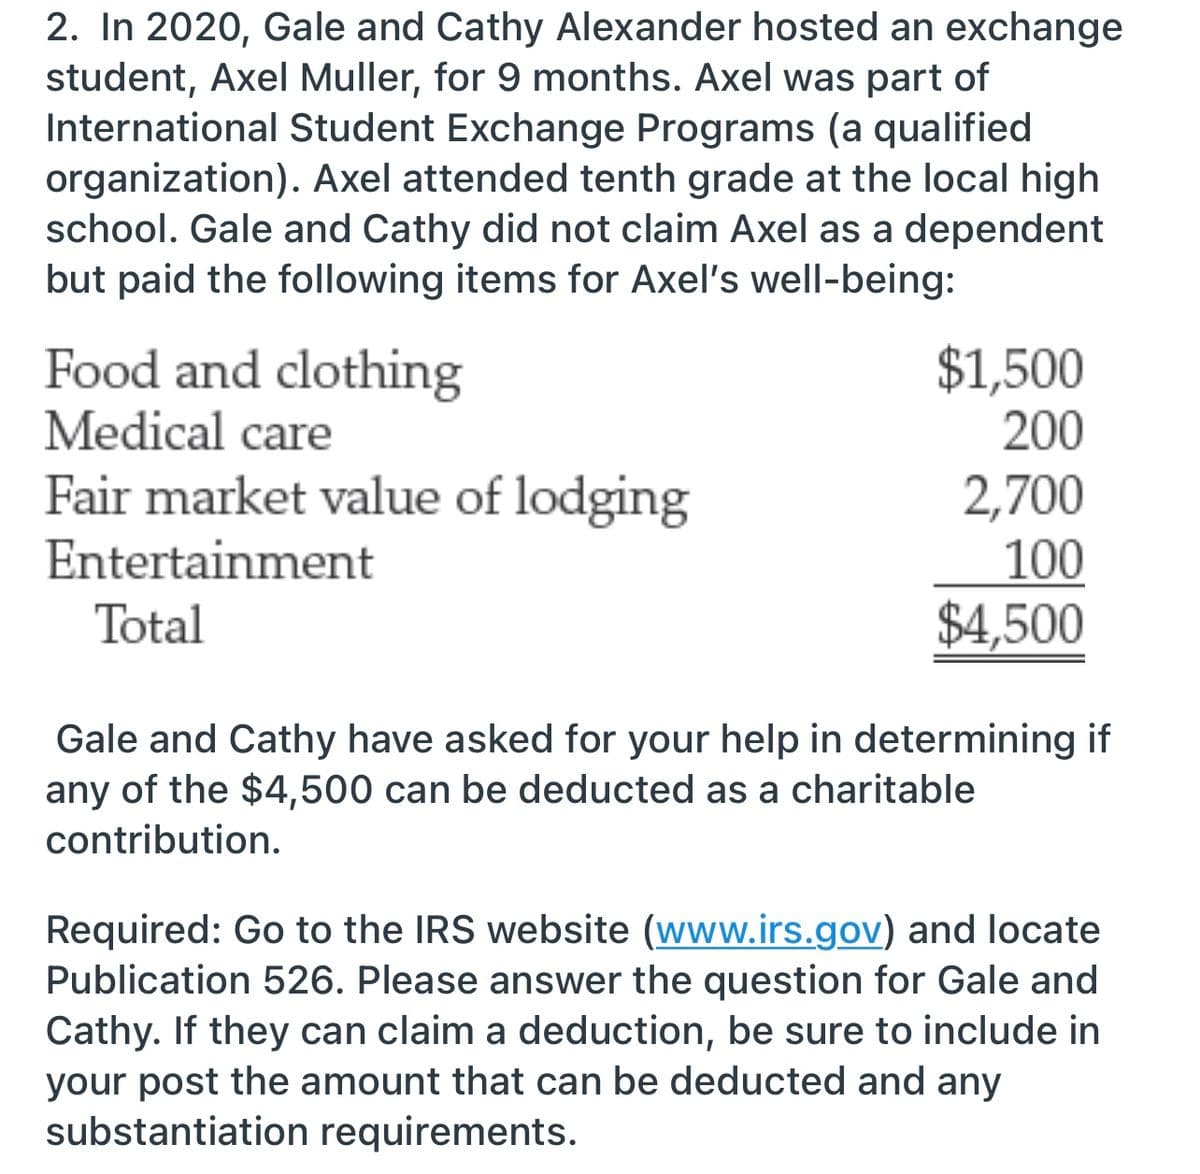 2. In 2020, Gale and Cathy Alexander hosted an exchange
student, Axel Muller, for 9 months. Axel was part of
International Student Exchange Programs (a qualified
organization). Axel attended tenth grade at the local high
school. Gale and Cathy did not claim Axel as a dependent
but paid the following items for Axel's well-being:
Food and clothing
Medical care
$1,500
200
Fair market value of lodging
2,700
100
$4,500
Entertainment
Total
Gale and Cathy have asked for your help in determining if
any of the $4,500 can be deducted as a charitable
contribution.
Required: Go to the IRS website (www.irs.gov) and locate
Publication 526. Please answer the question for Gale and
Cathy. If they can claim a deduction, be sure to include in
your post the amount that can be deducted and any
substantiation requirements.
